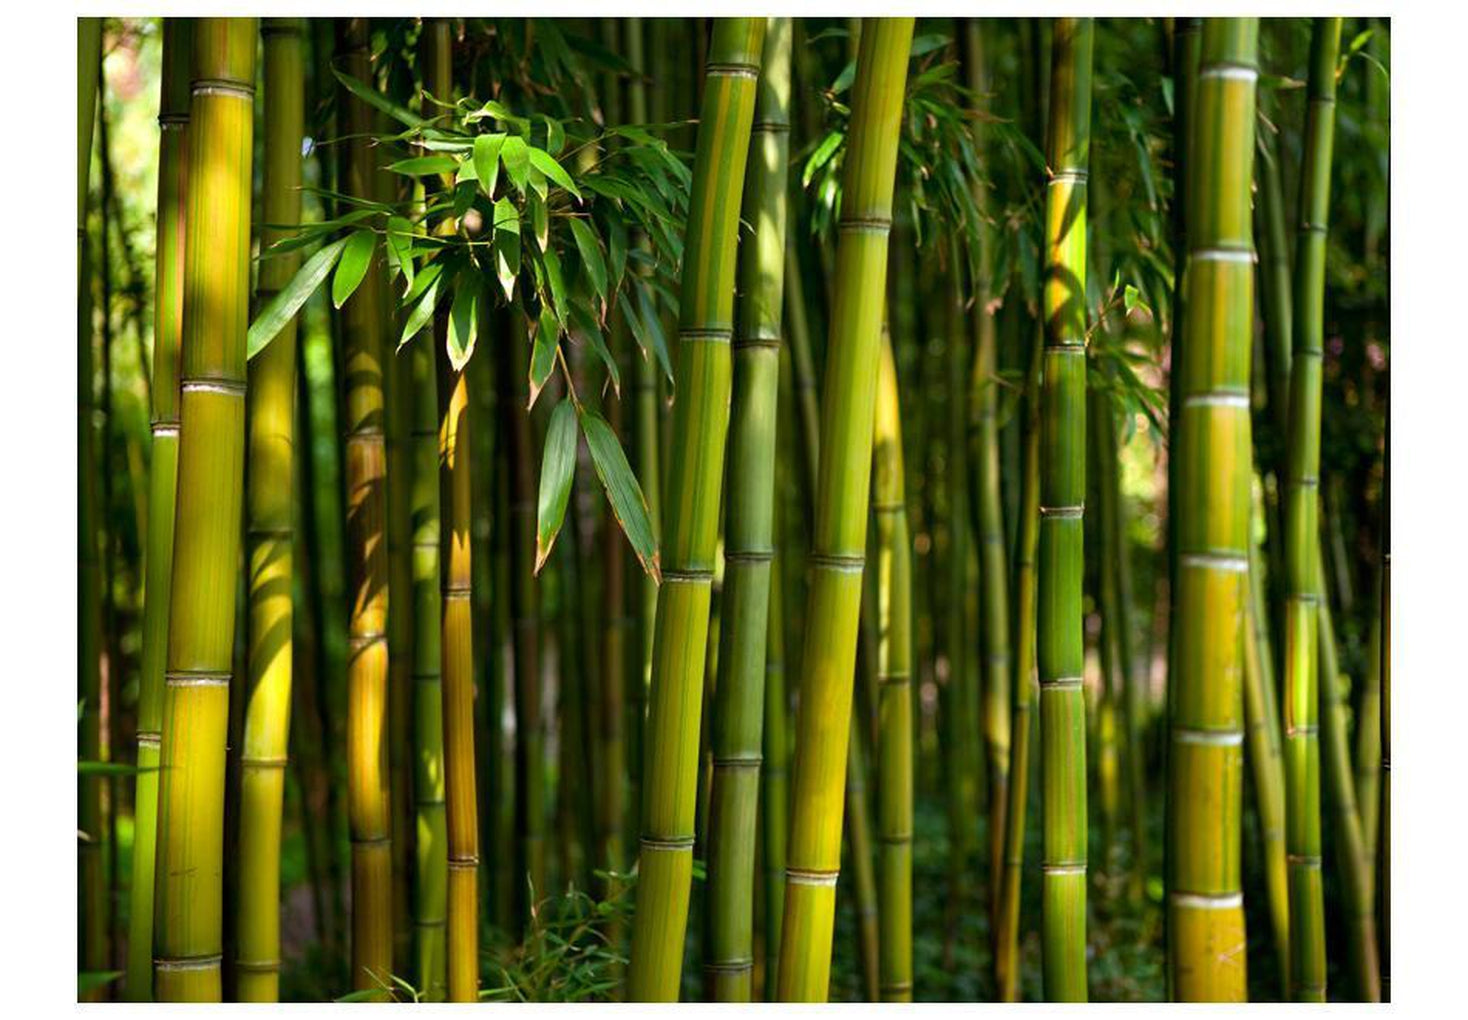 Wall mural - Asian bamboo forest-TipTopHomeDecor